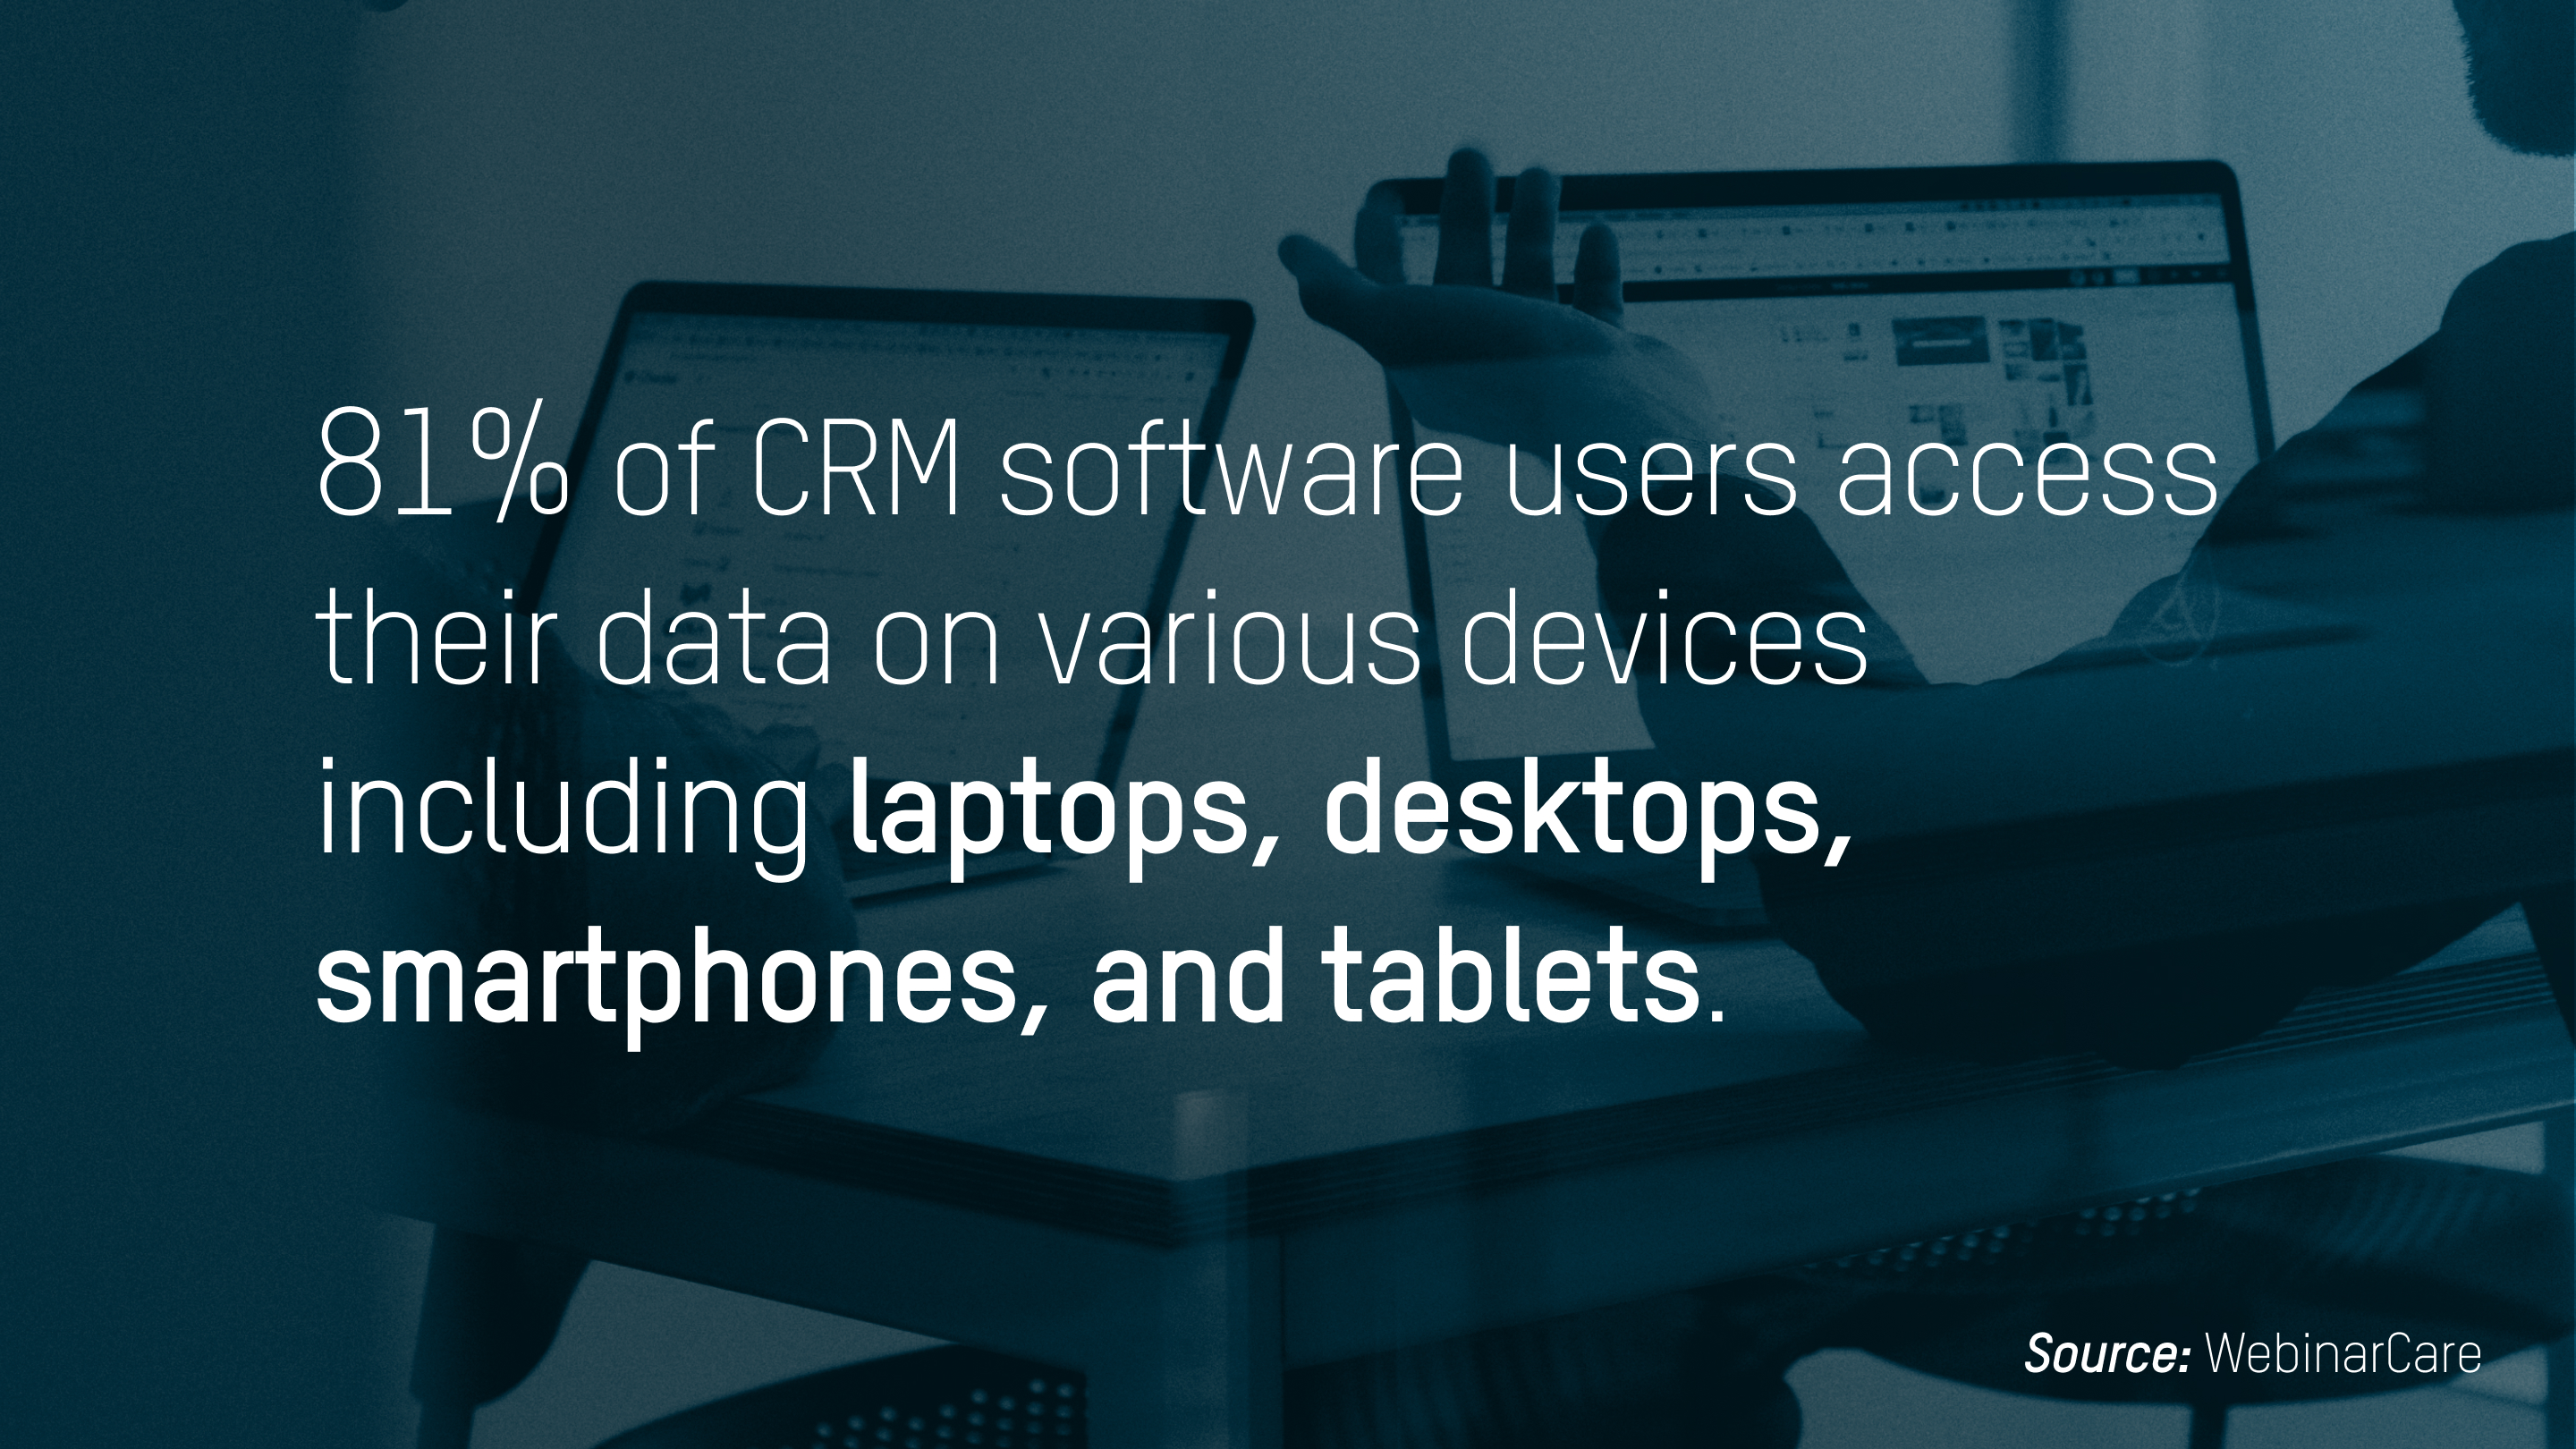 81% of CRM software users access heir data on various devices including laptops, desktops, smartphones, and tablets.